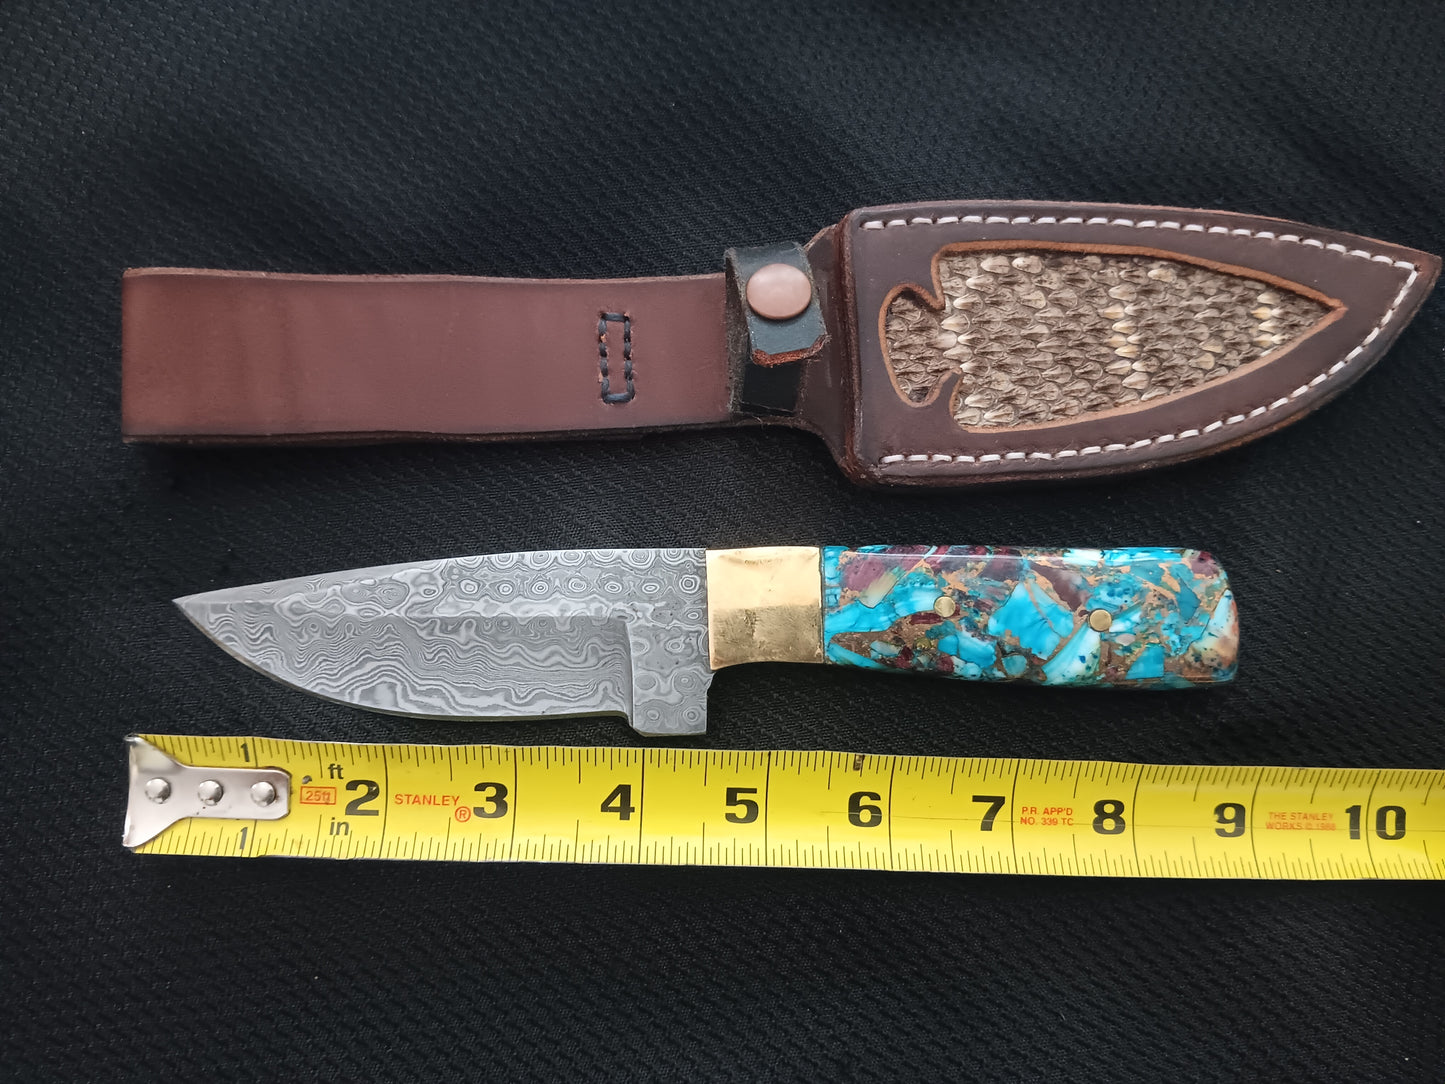 Turquoise, Brass, and Oyster Shell Composite Handle and Damascus Blade Hunting Knife with a Rattlesnake sheath